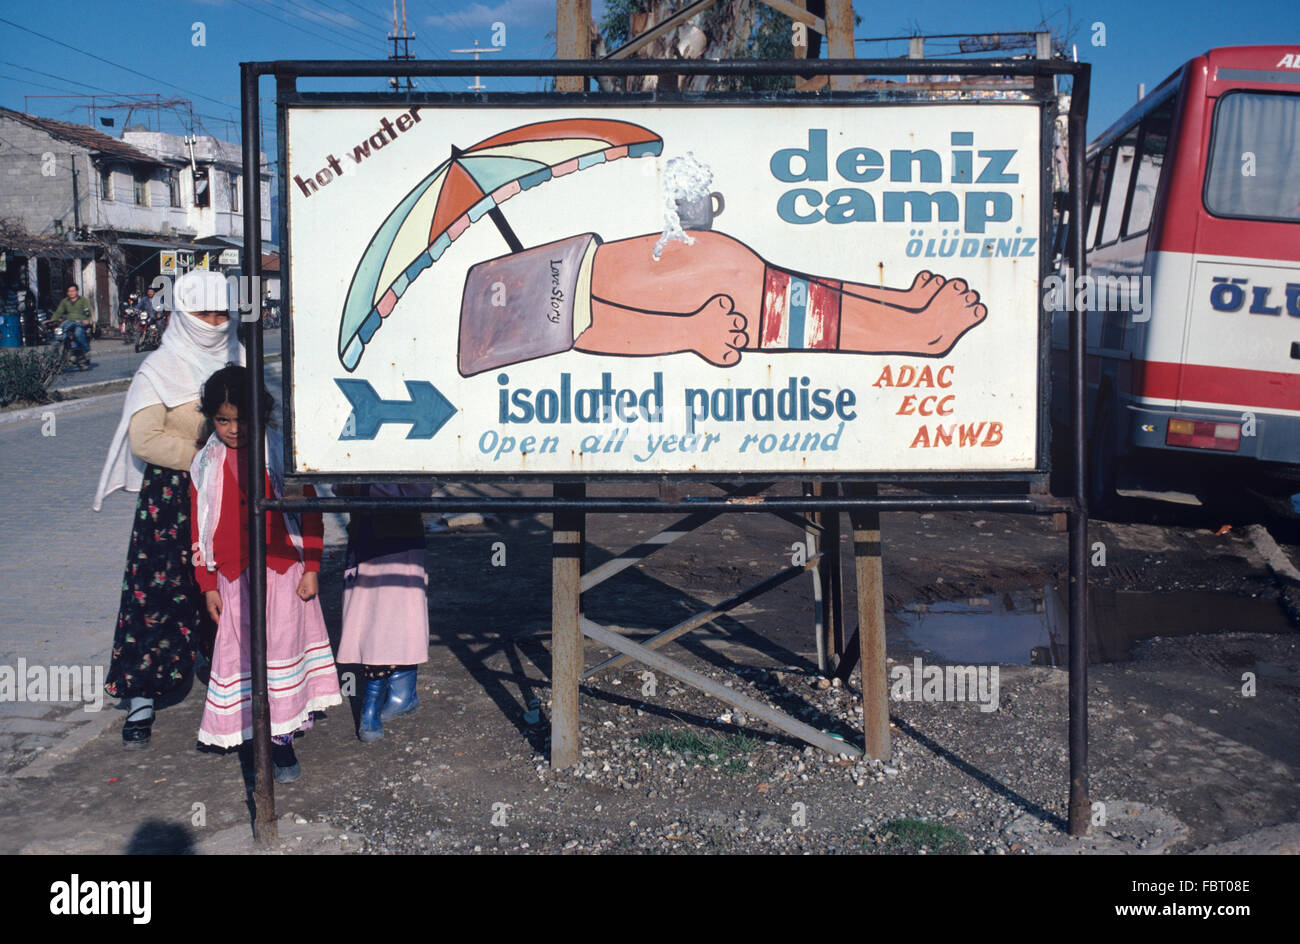 Turkish Woman Wearing Veil and Hotel Sign 'Isolated Paradise' for Deniz Camp at Demizköy, Didim, in Aegean Turkey. Stock Photo